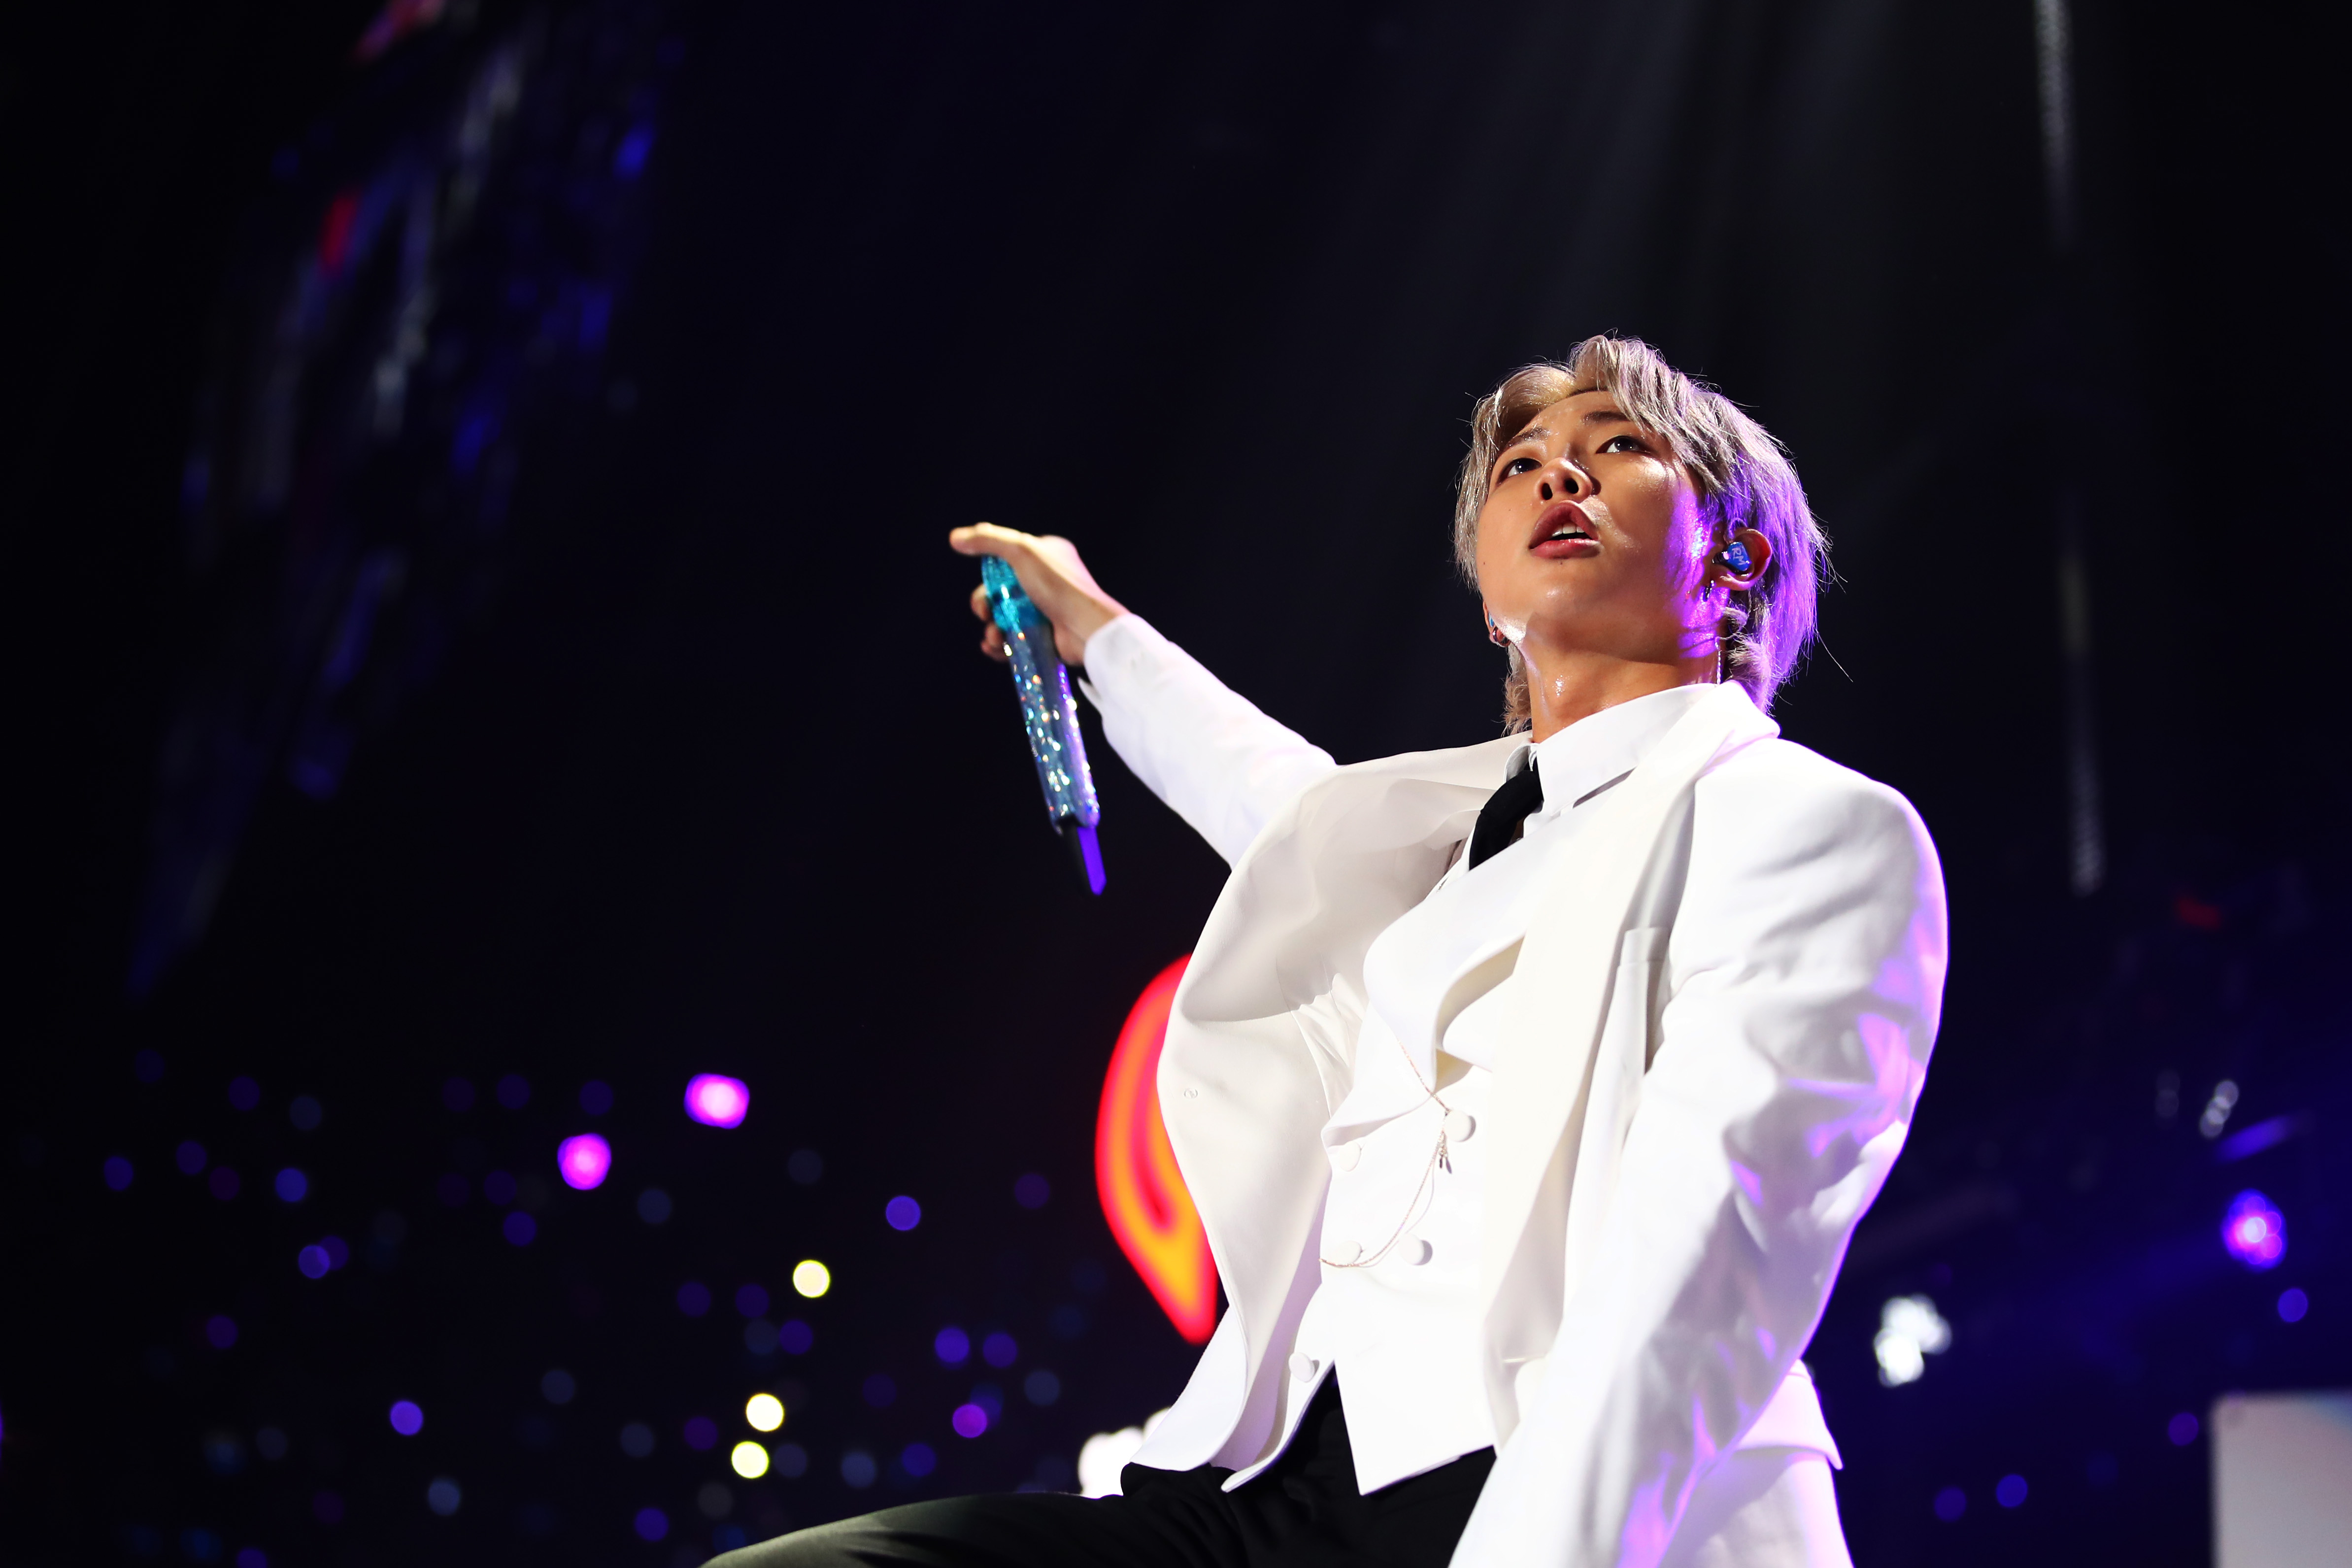 RM of BTS performs onstage during 102.7 KIIS FM's Jingle Ball 2019 Presented by Capital One at the Forum